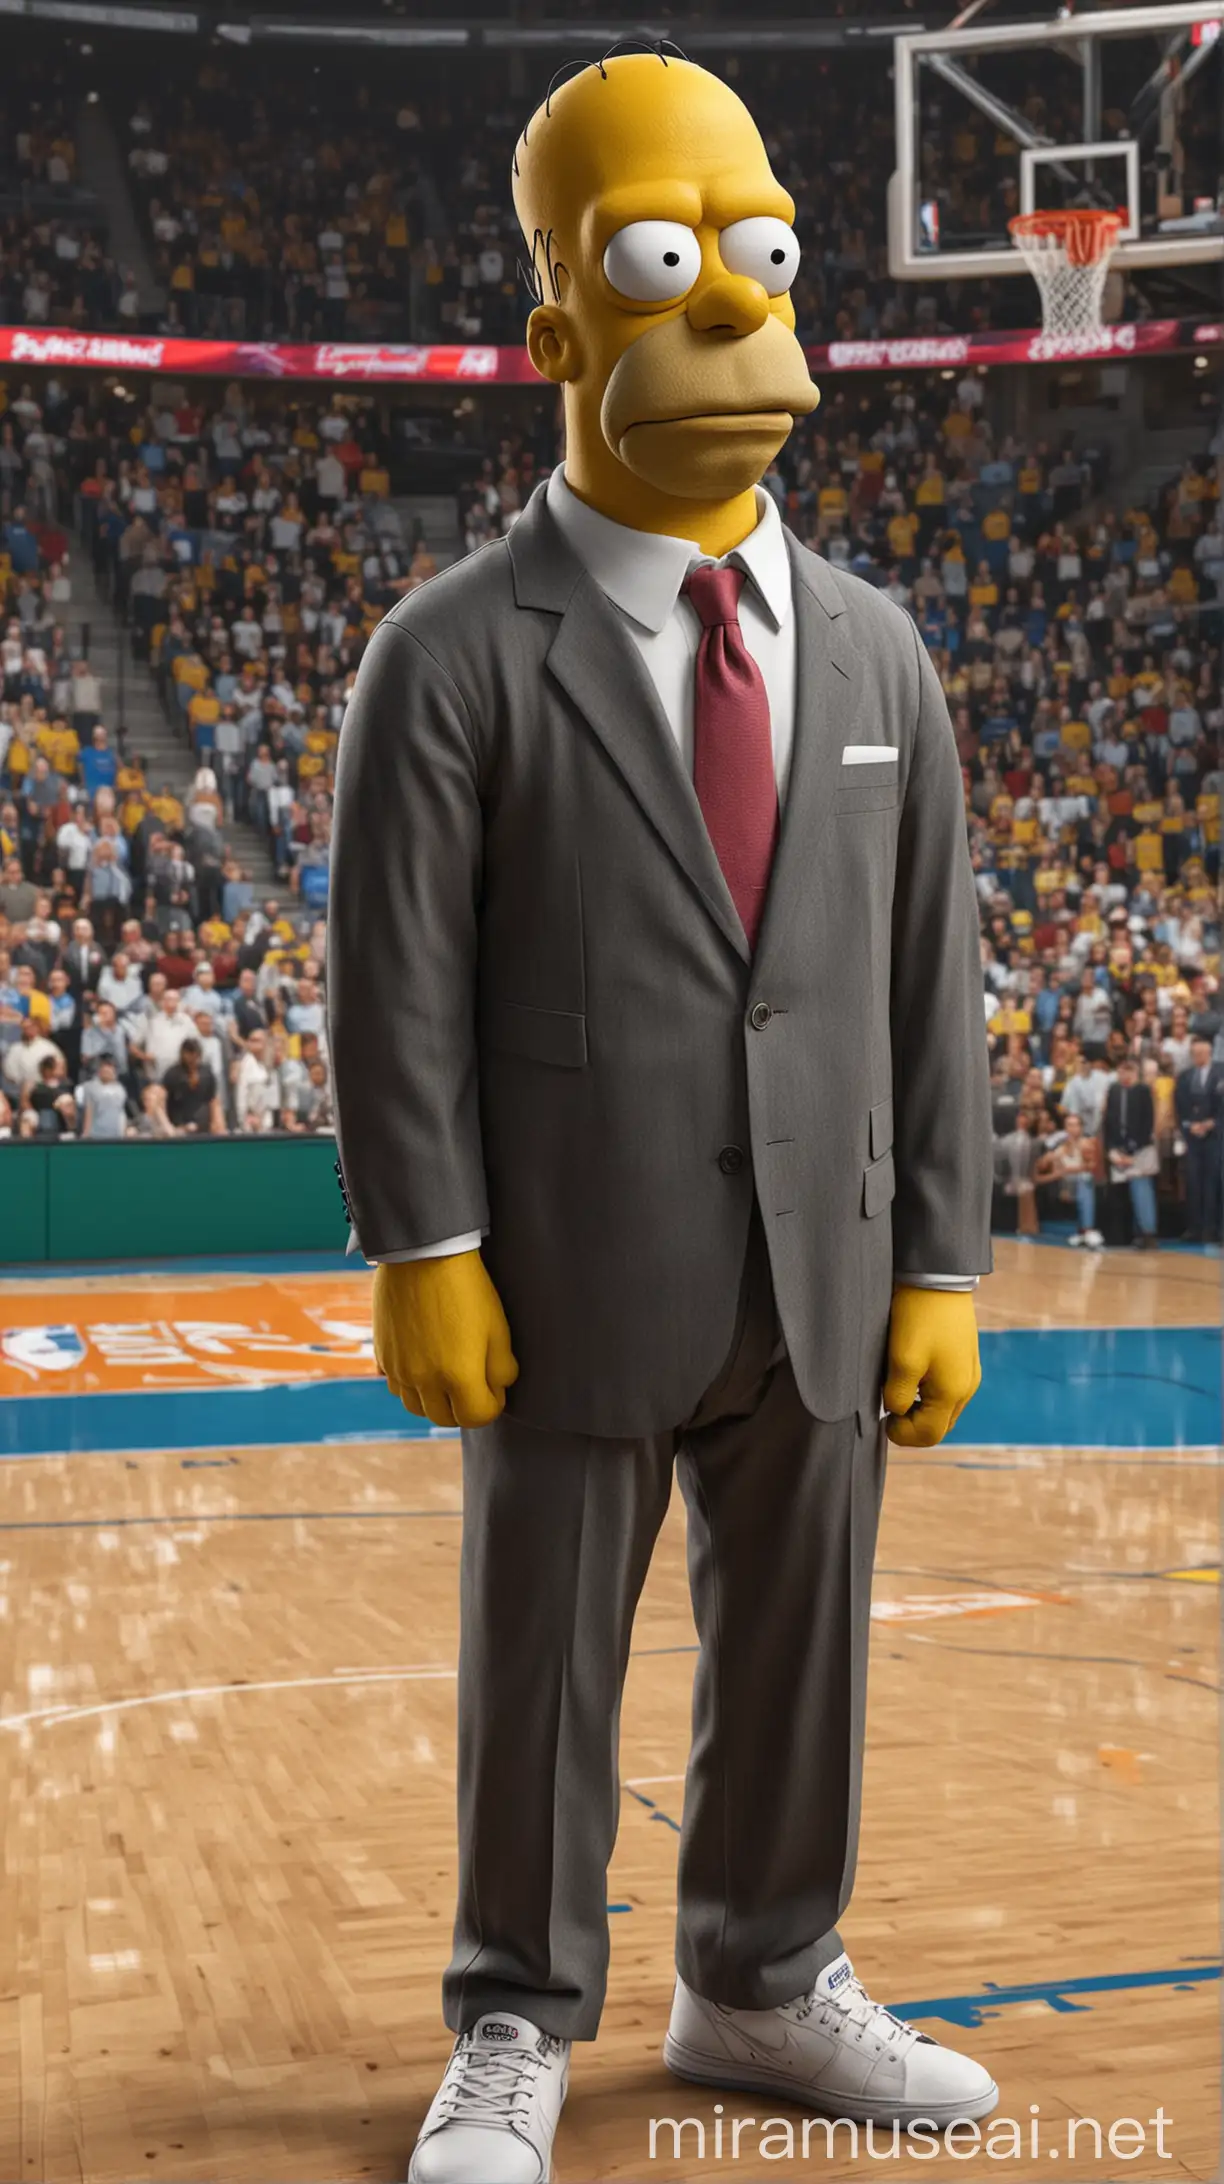 create a hyper real image of Homer Simpson on a NBA Court in a suit